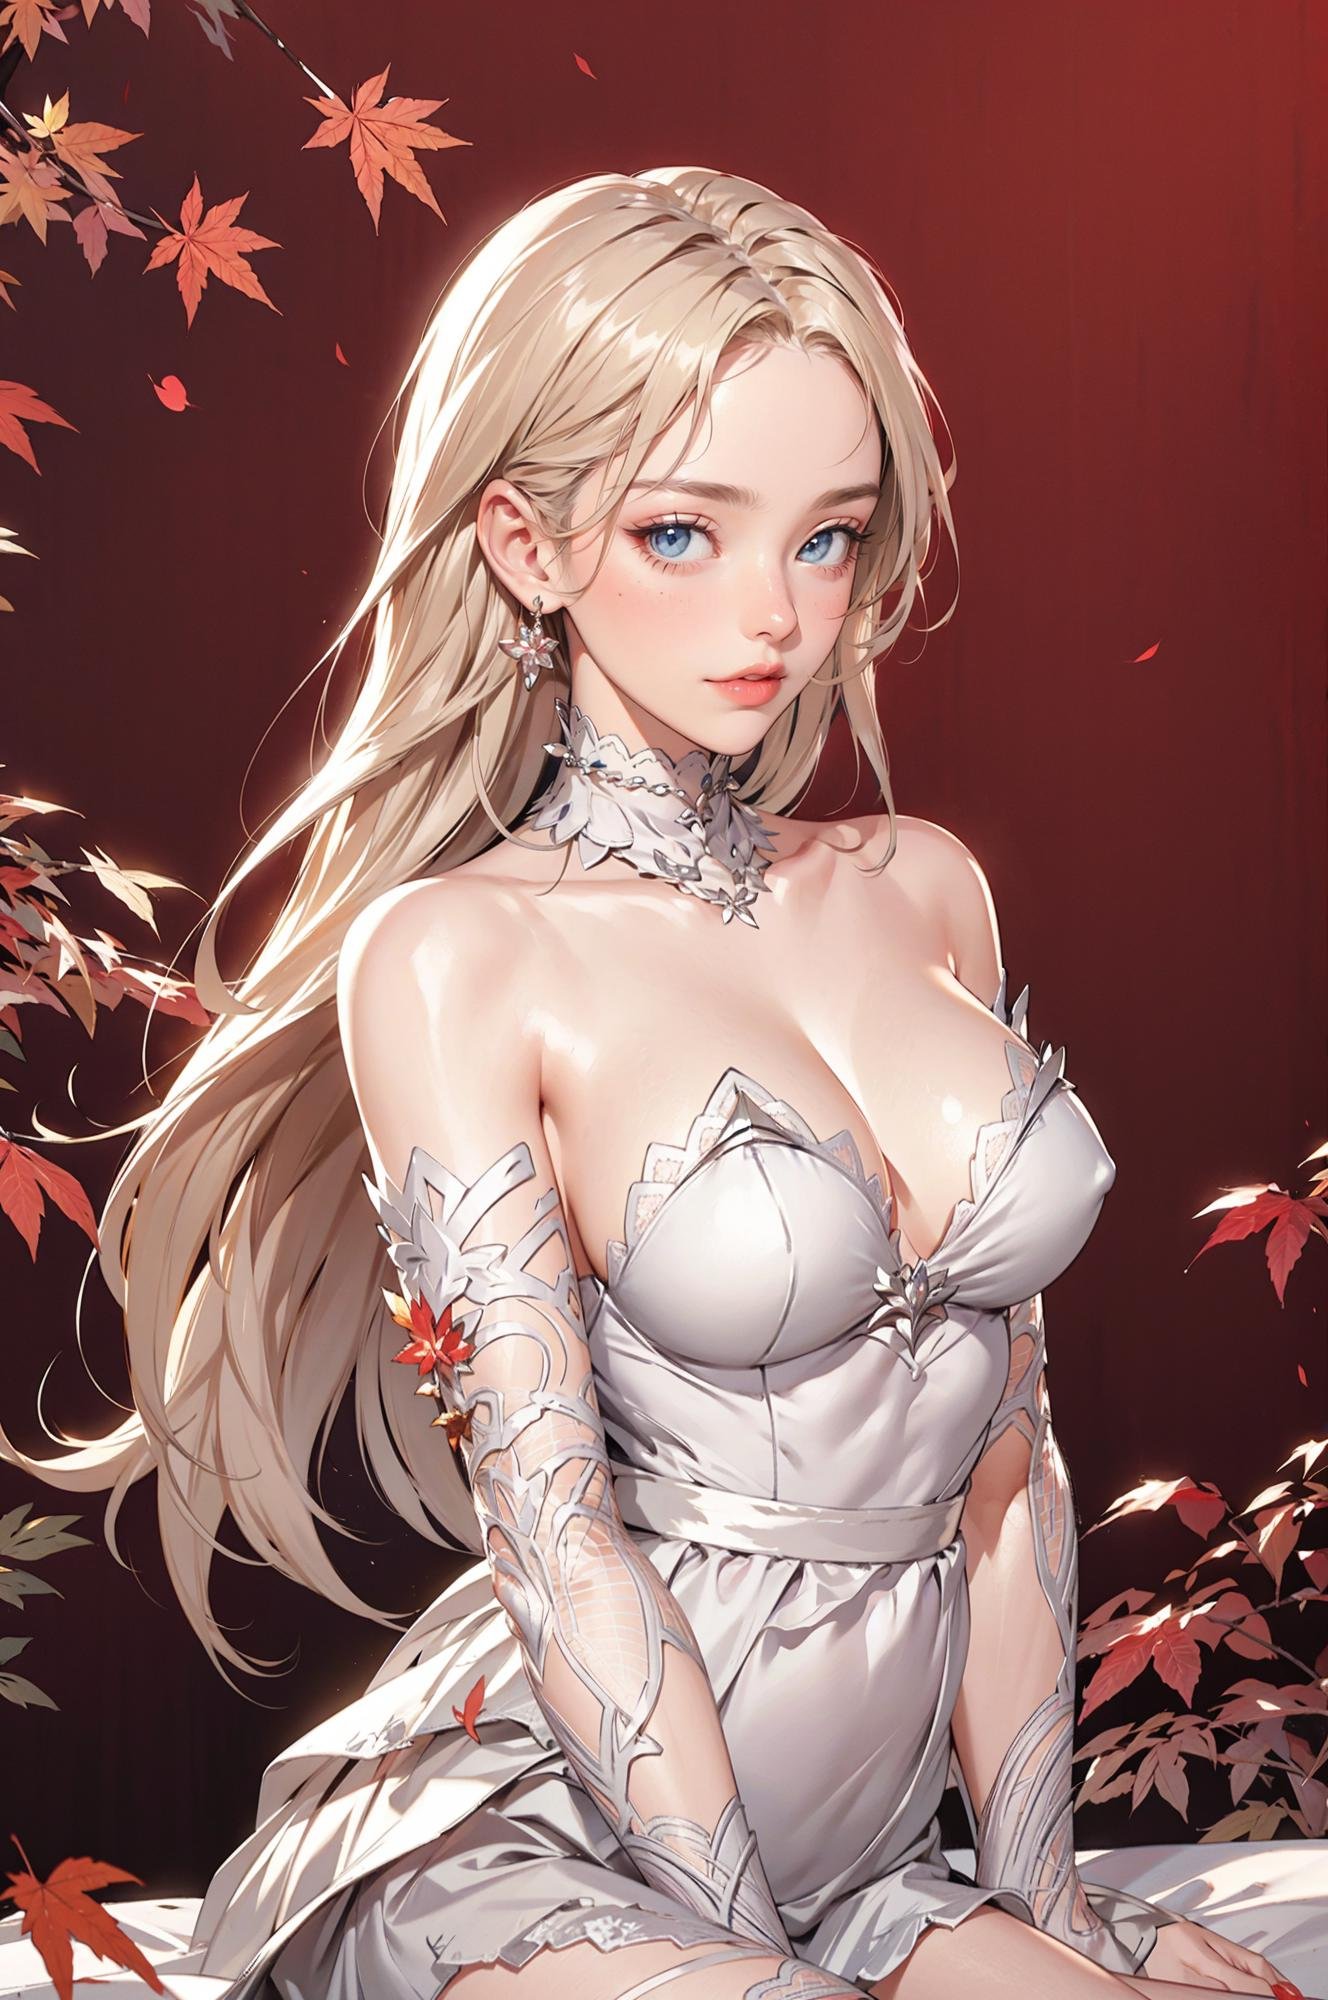 LAinnopromise, stunning woman wearing LAinnopromise dress, white dress, <lora:LAinnopromise:0.85>, (blonde hair),(hair blown by wind, flowing long hair:1.4), (blonde hair:1.2), hair blown by wind, (large breast), sitting on flowers, flower bed, nature, (red theme:1.5), (autumn, red leaves, bright background, red forest background:1.3, white and red background:1.5), falling white petals, ( shy:1.2), BREAK, (masterpiece:1.4), (4k:1.2), (extreme resolution:1.2), (highly intricate:1.2), (studio quality:1.2), (extremely detailed:1.2), (beautiful and aesthetic:1.4) 